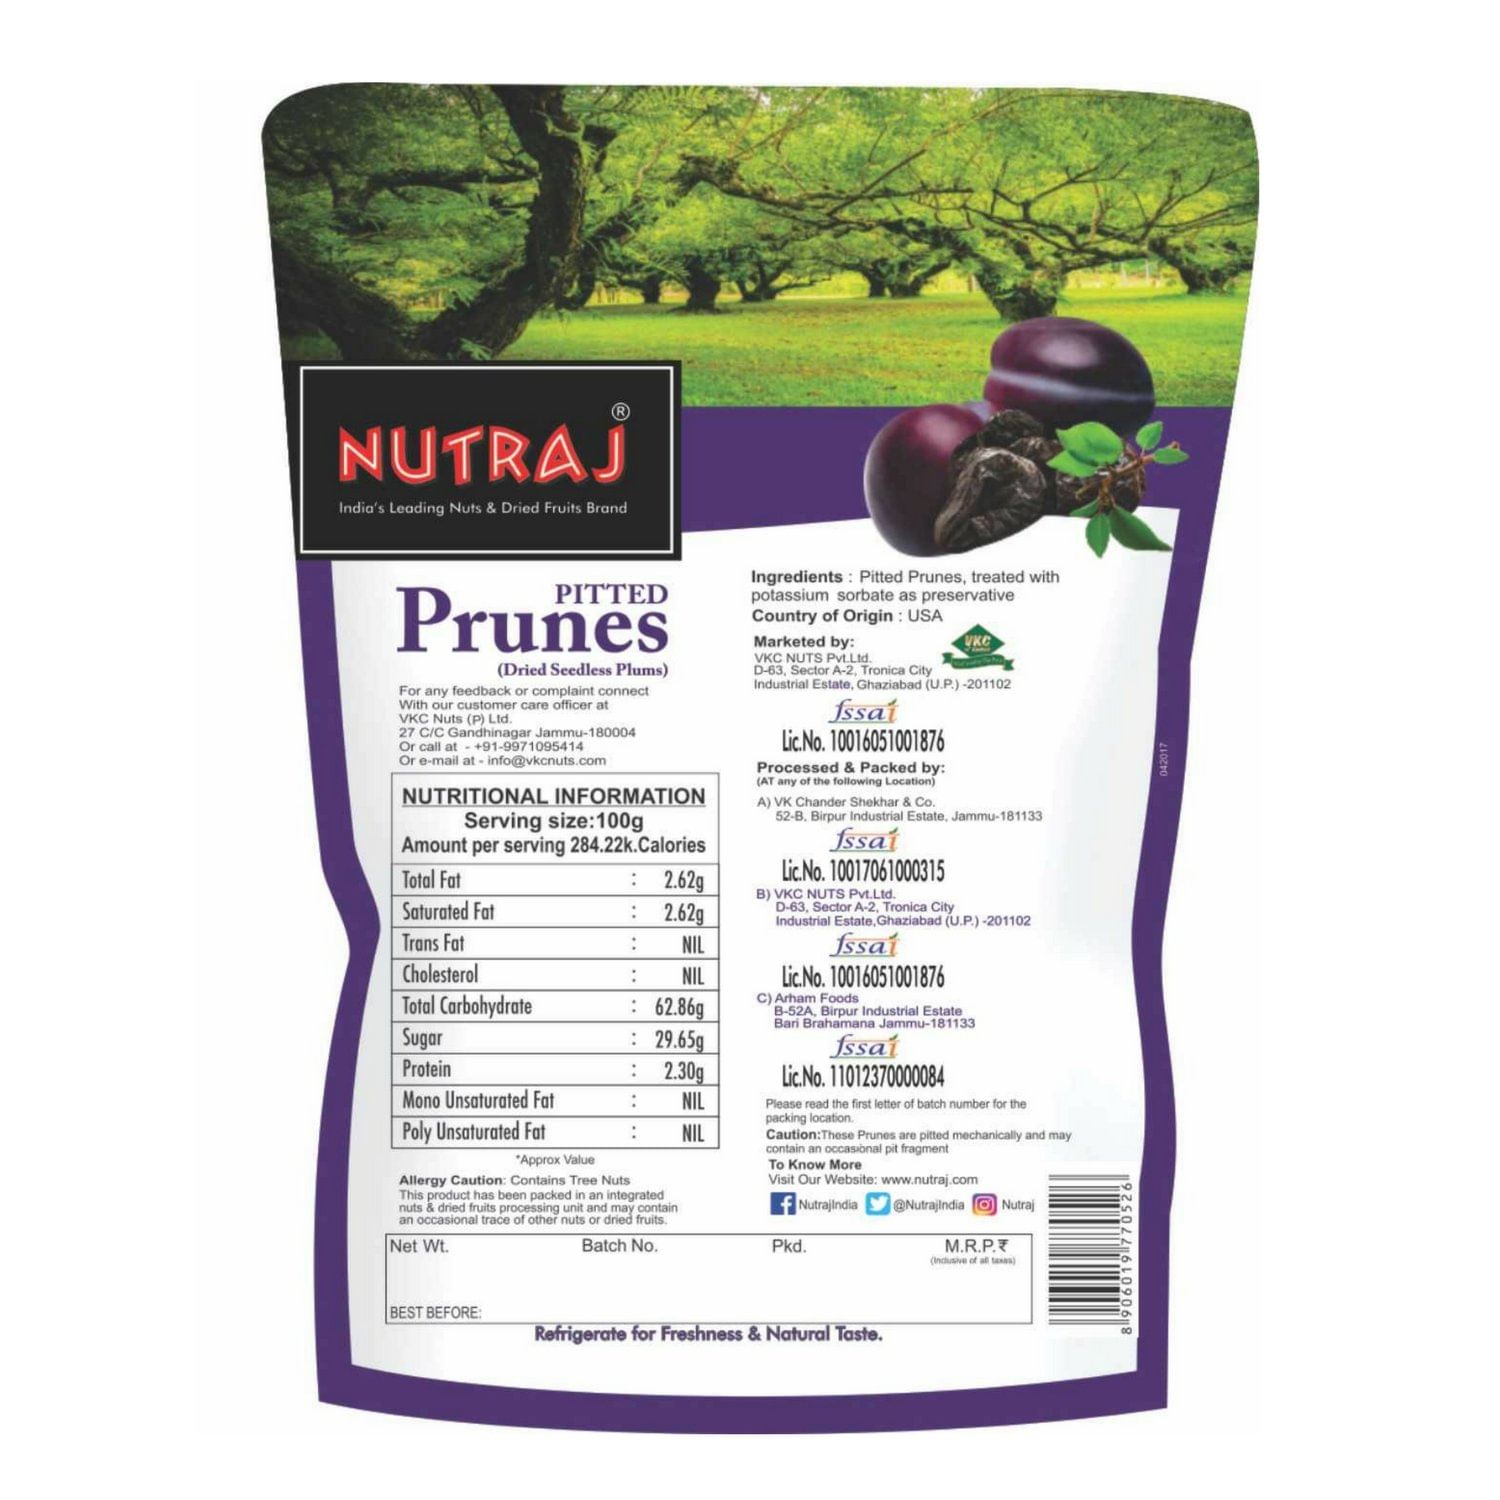 Nutraj California Pitted Prunes (Dried Seedless Plums) 200g